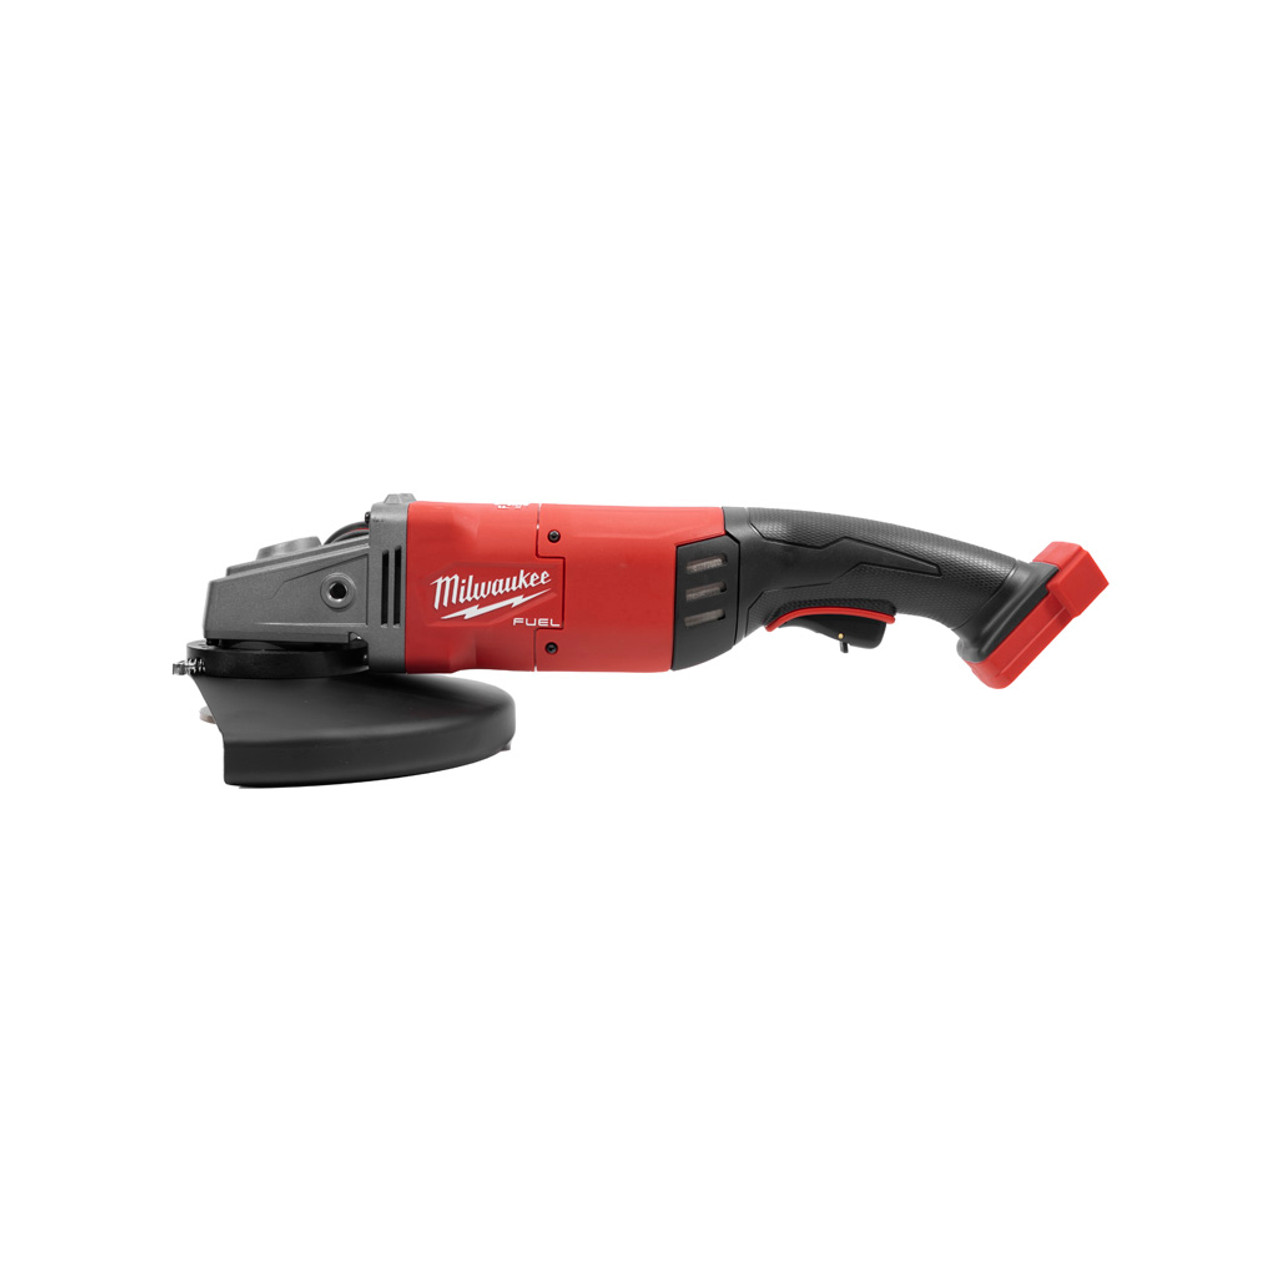 15 amp 7- Inch/9- Inch Large Angle Grinder